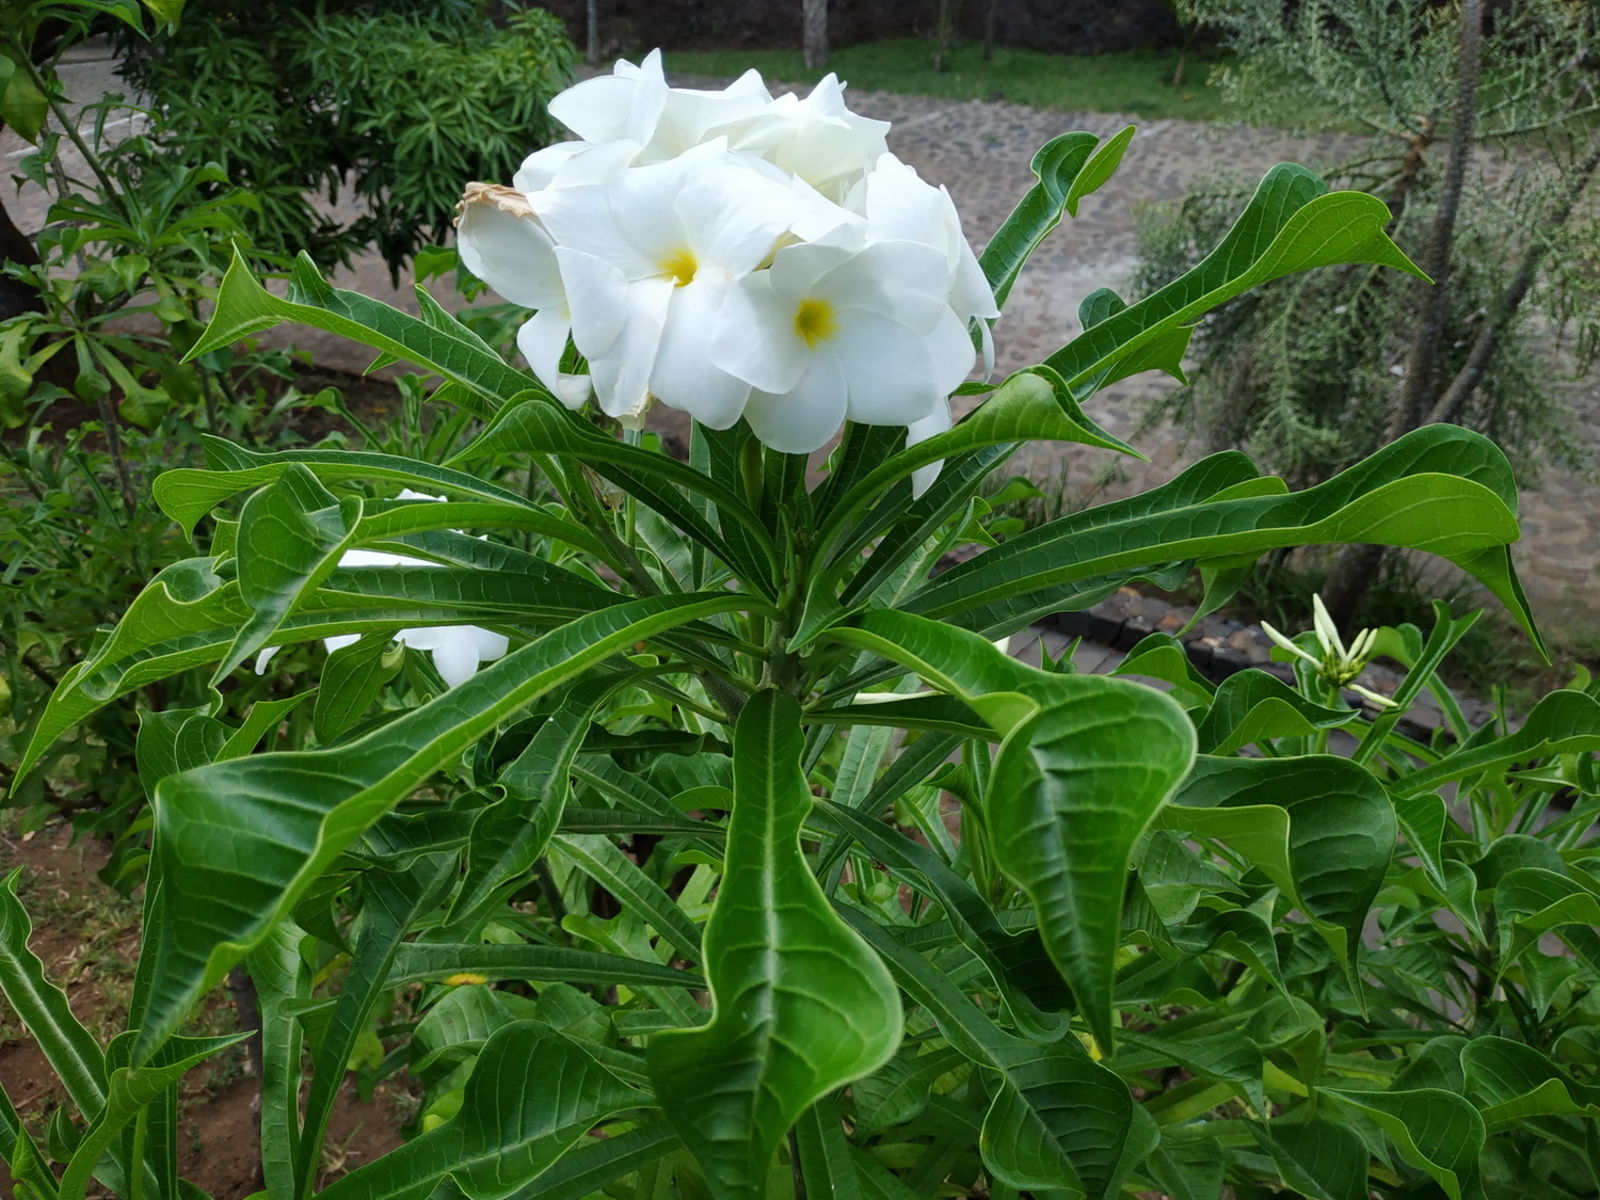 Plumeria pudica Jacq. | Colombian Plants made accessible